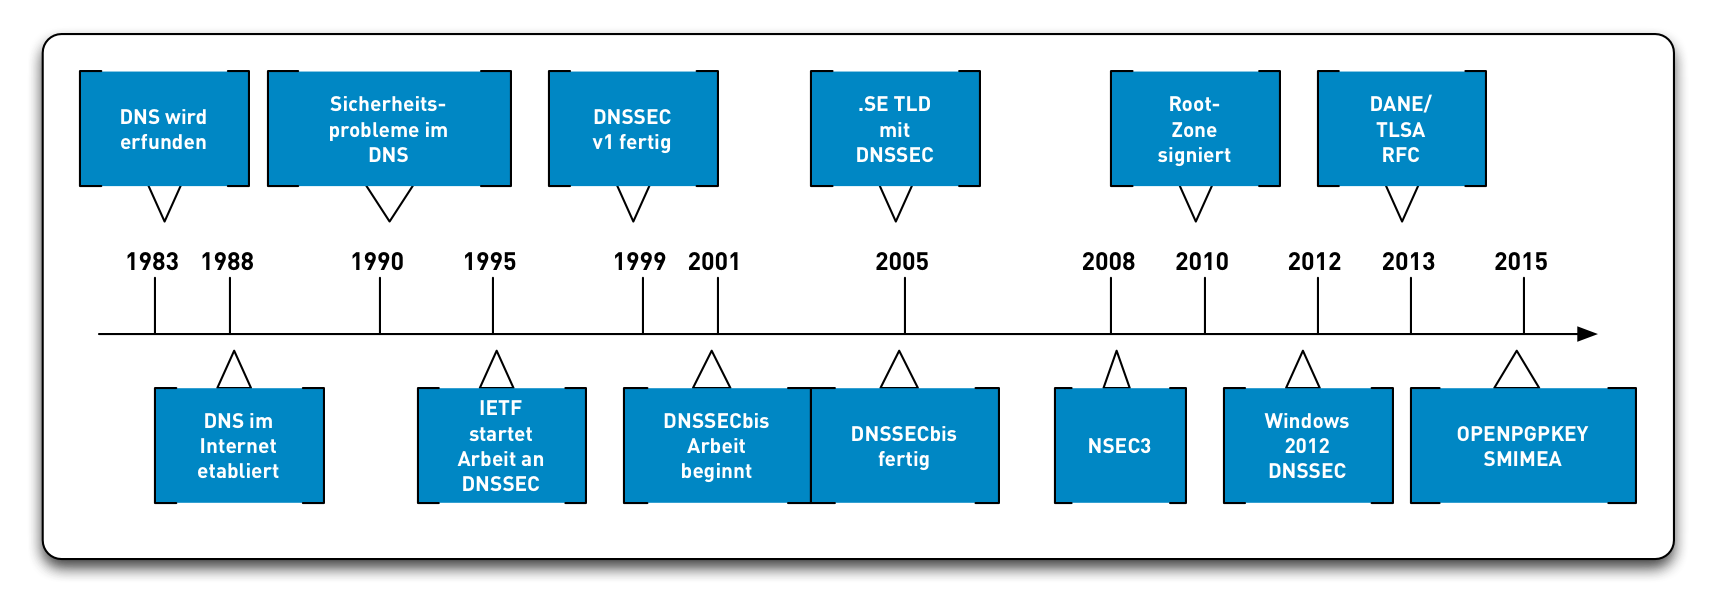 DNSSEC-History14.png